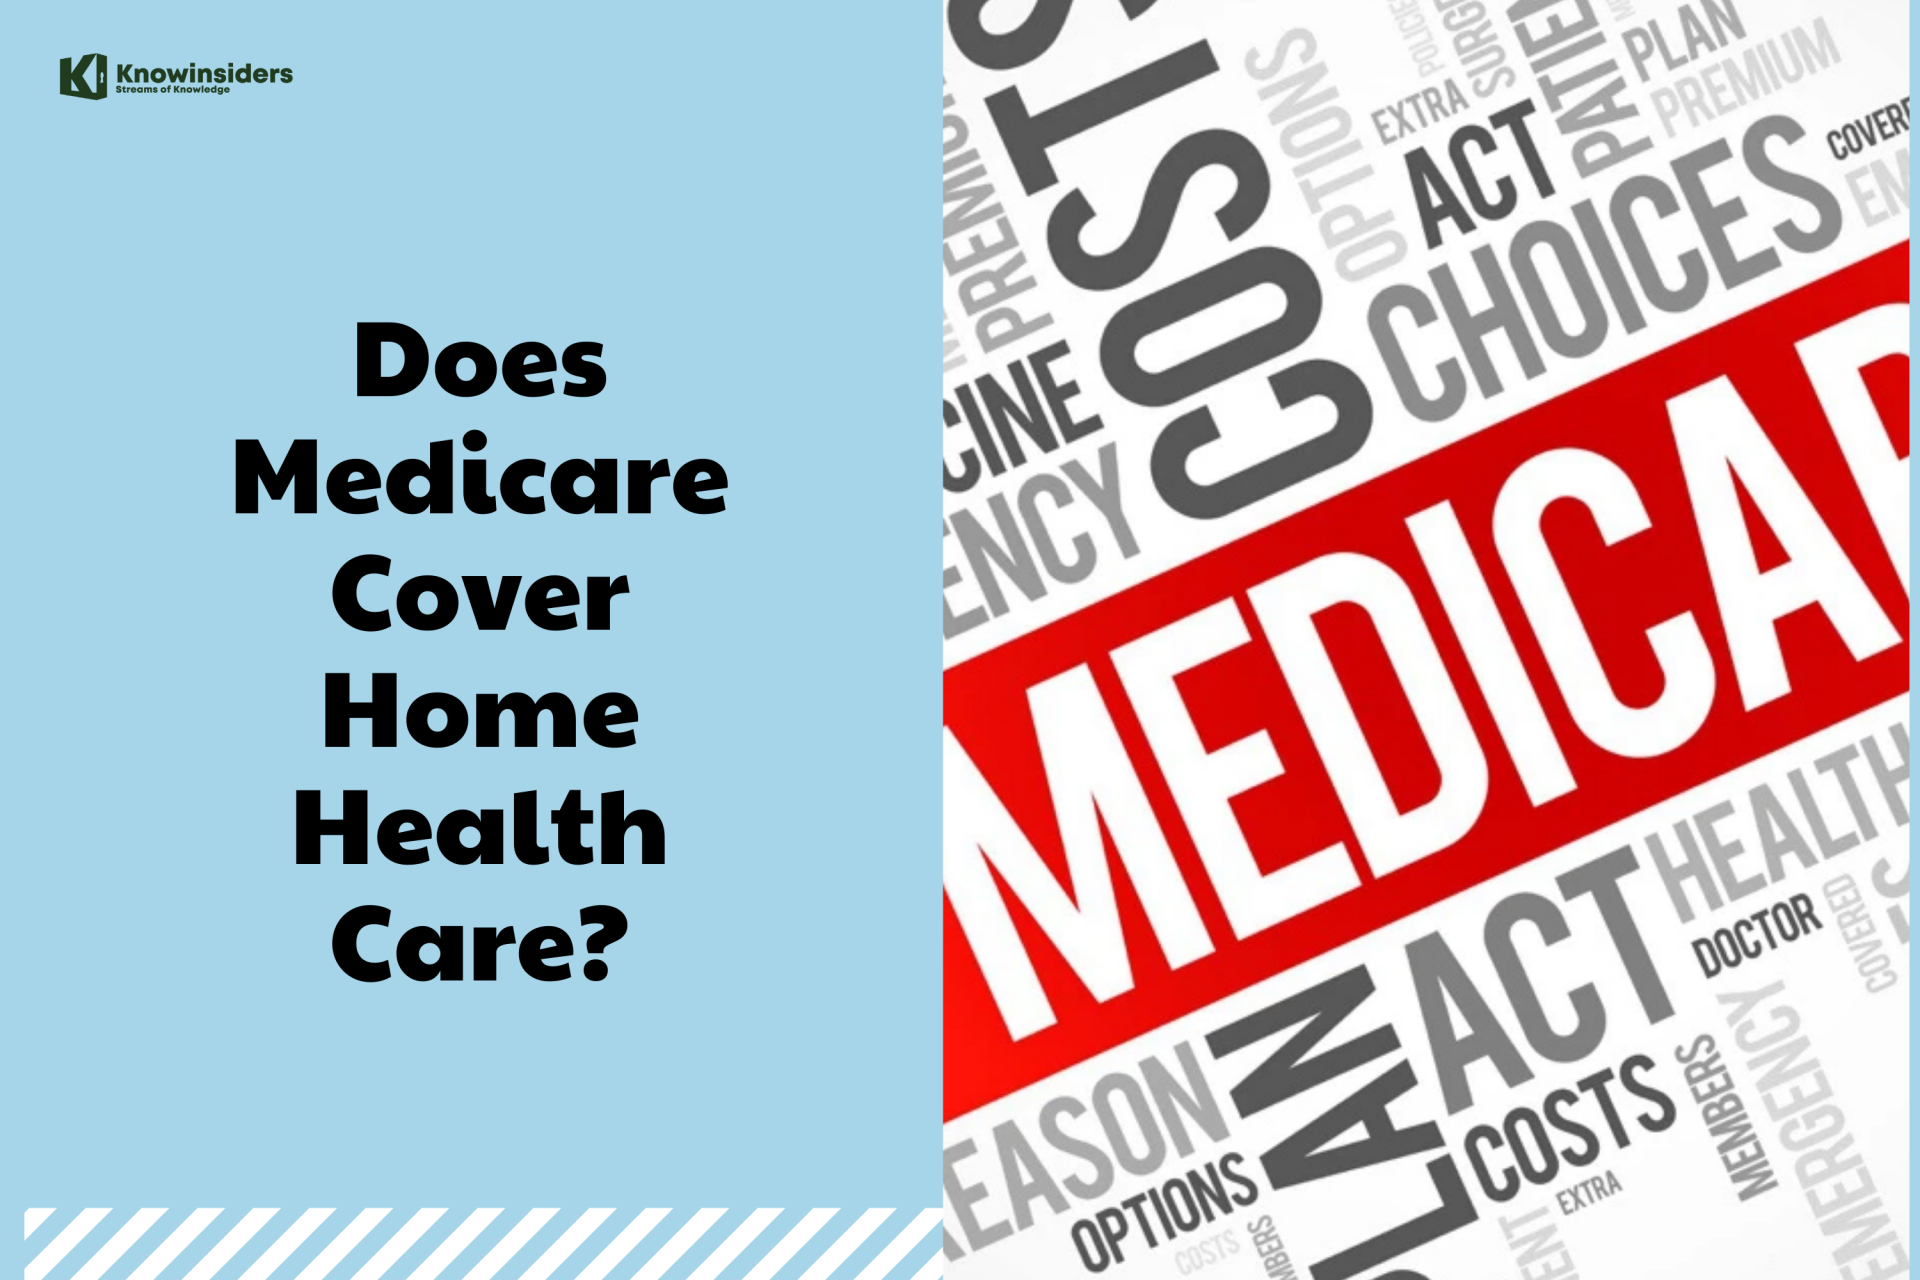 Does Medicare Cover Home Healthcare?